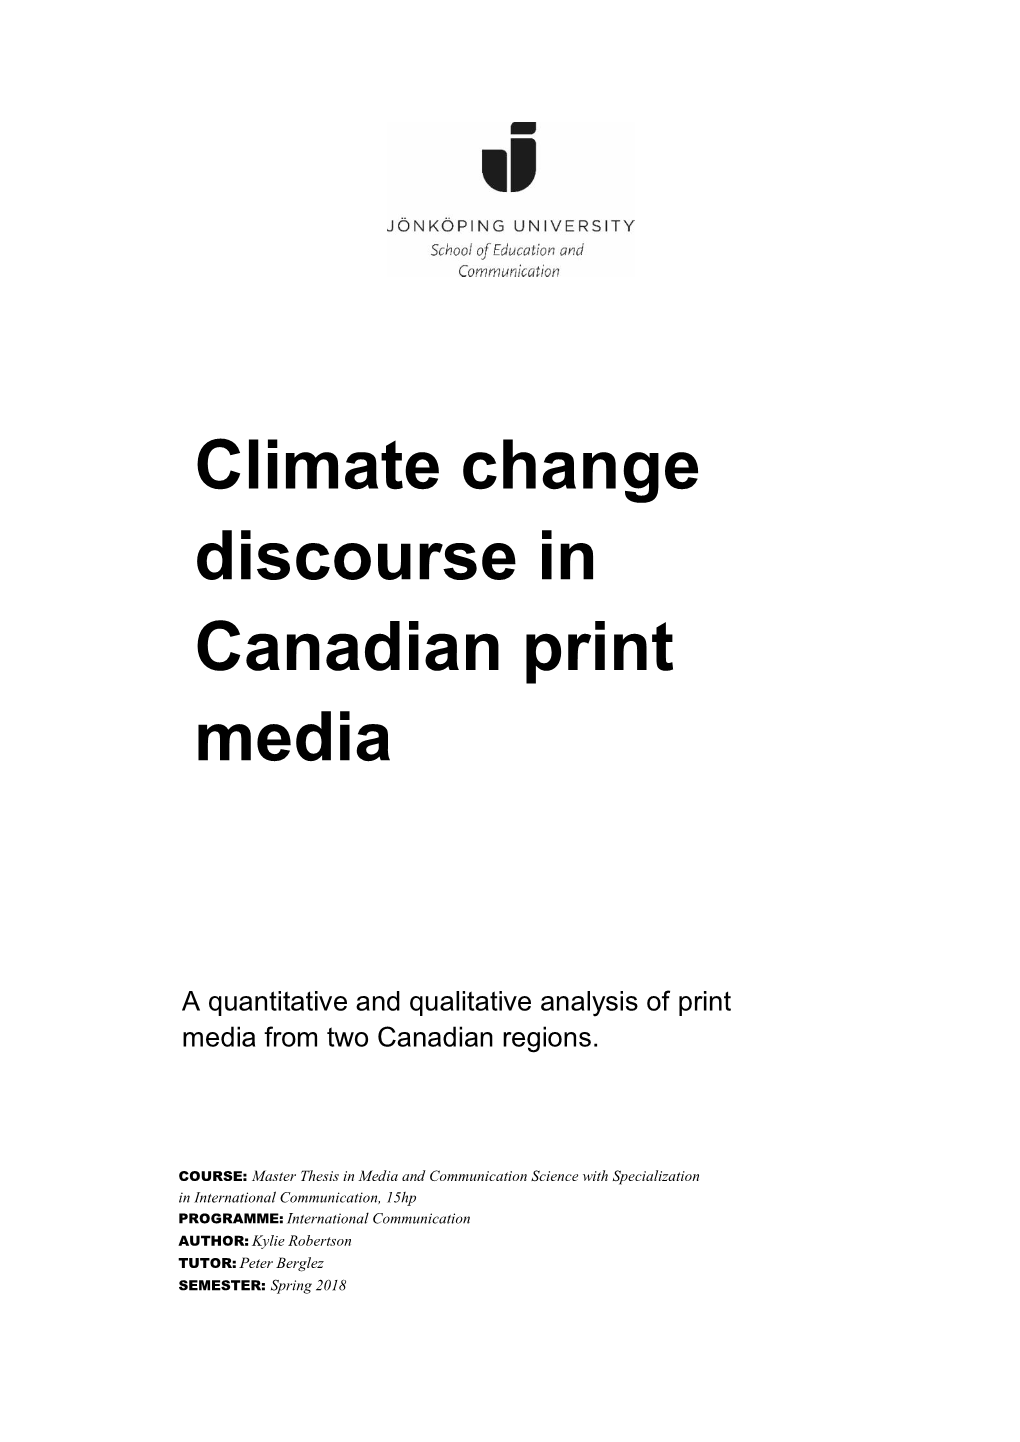 Climate Change Discourse in Canadian Print Media